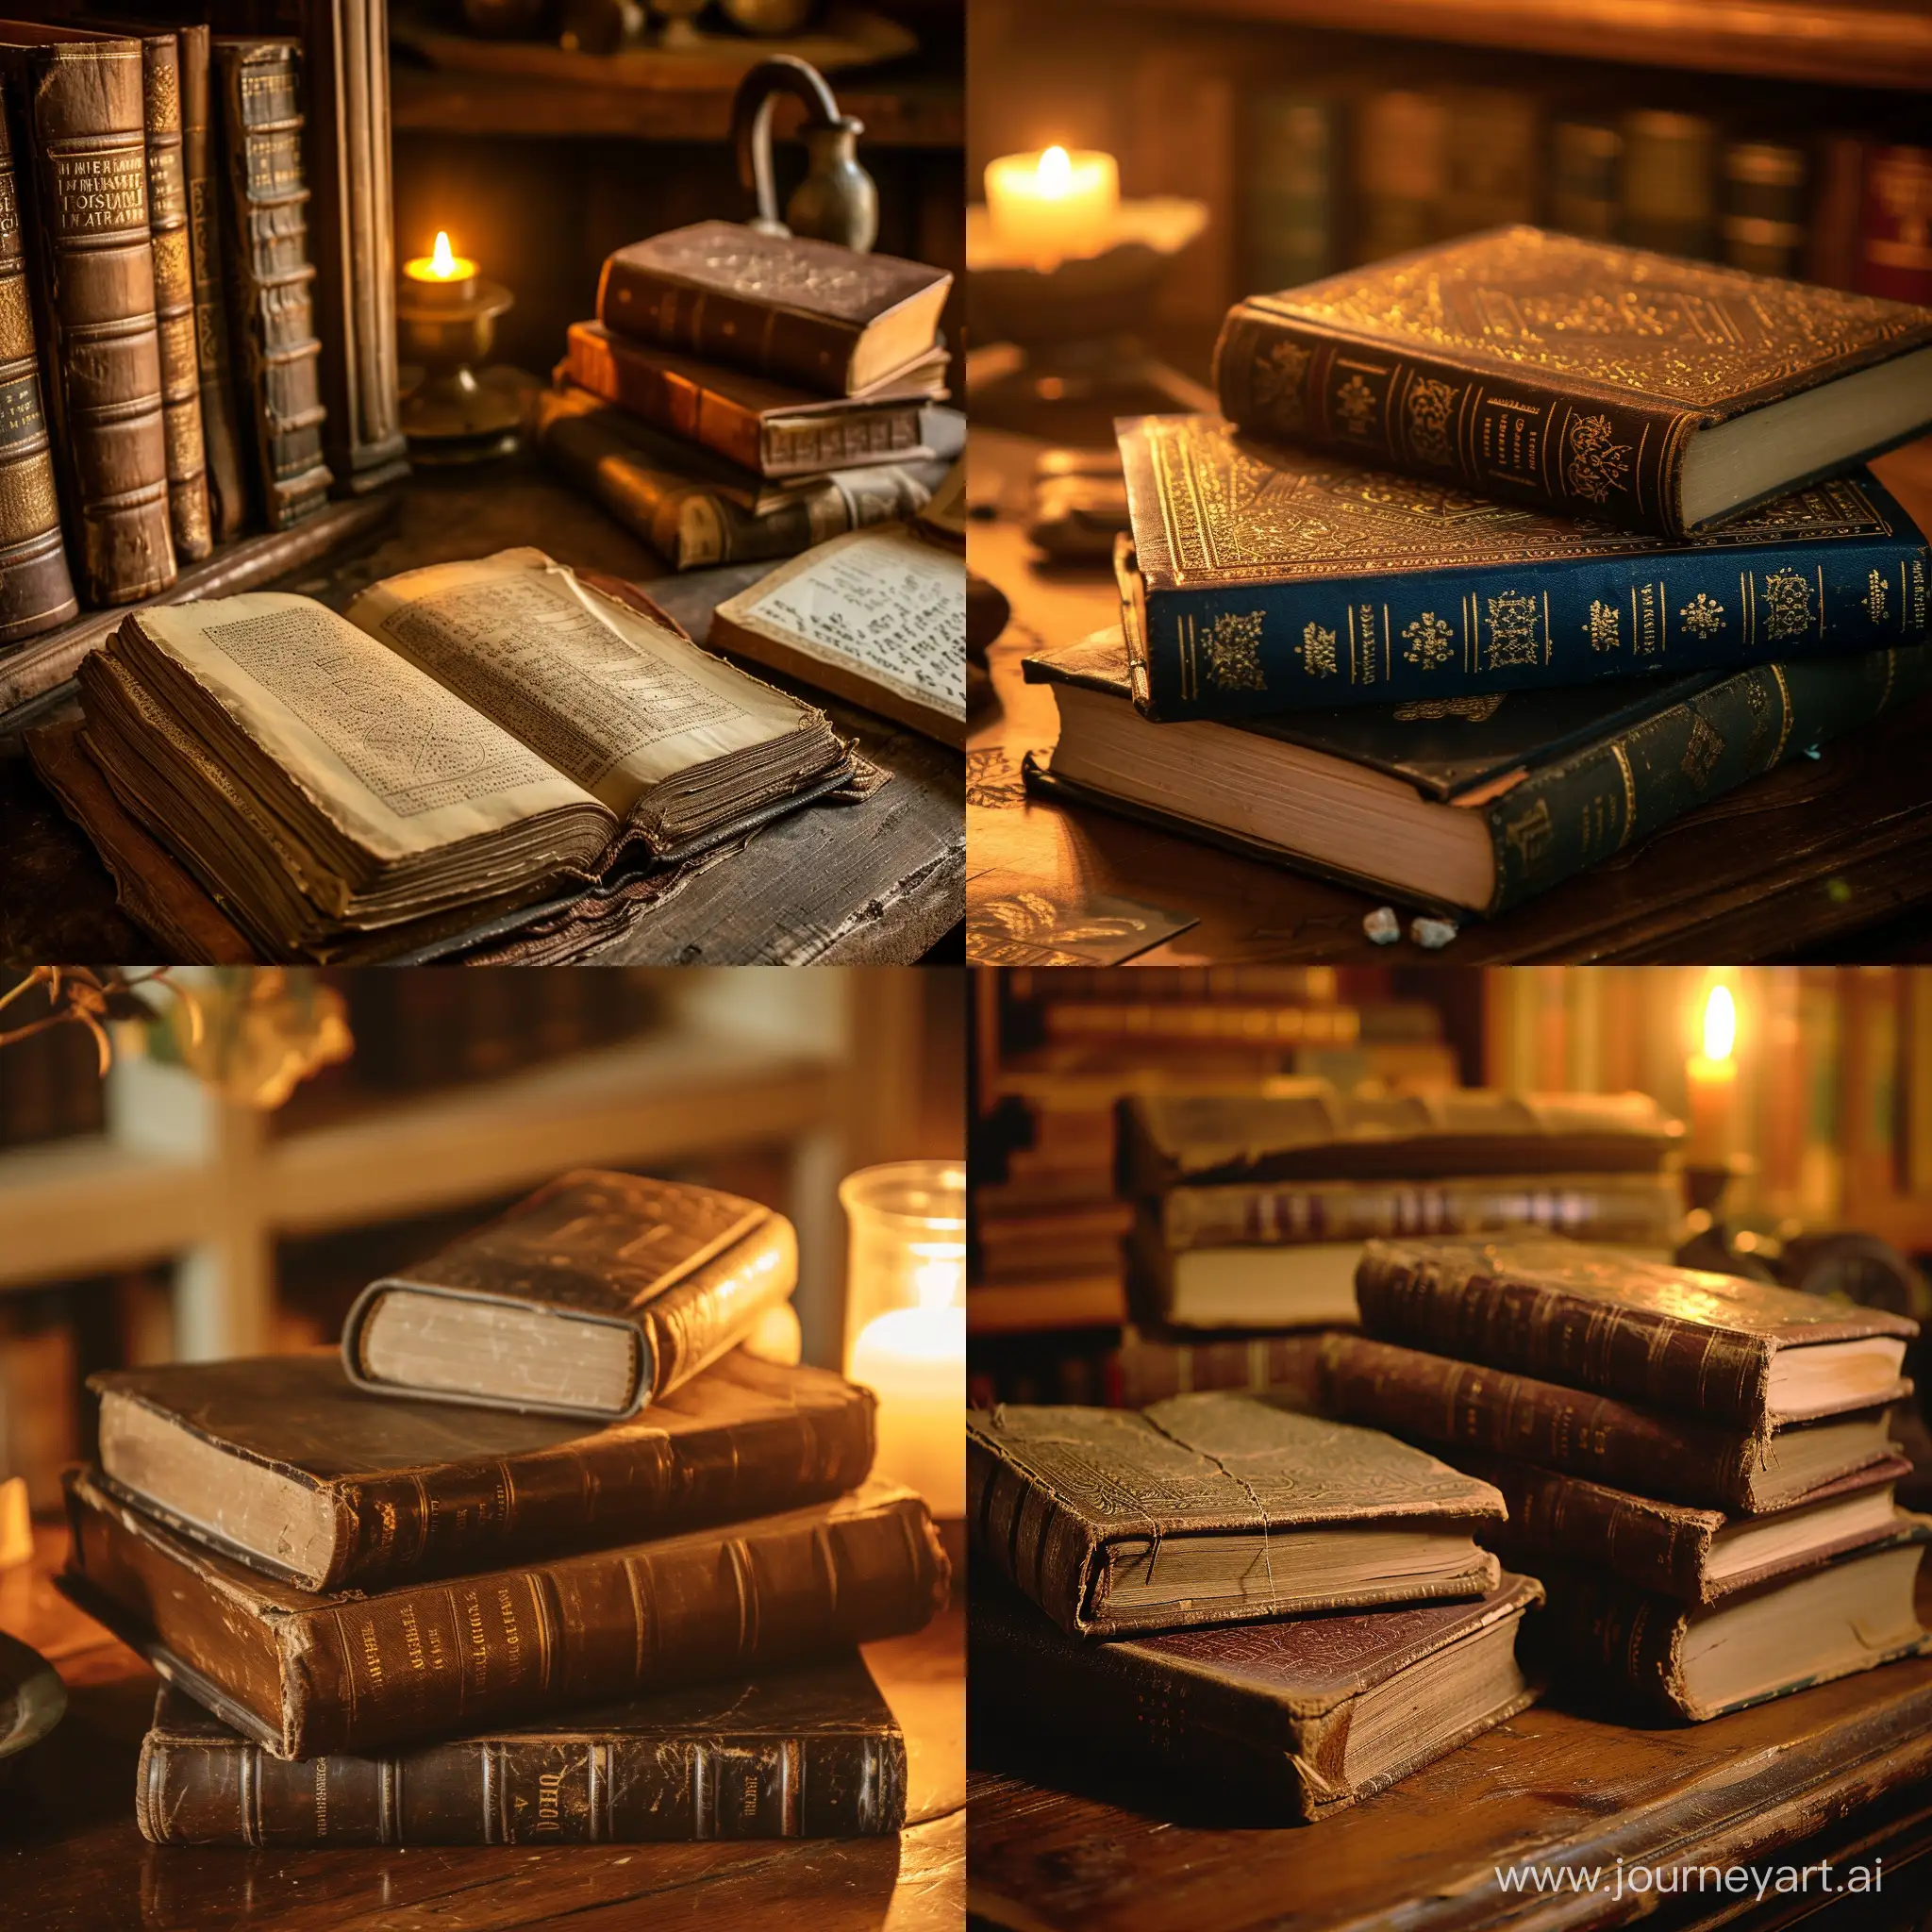 Vintage-Desk-with-Illuminated-Ancient-Books